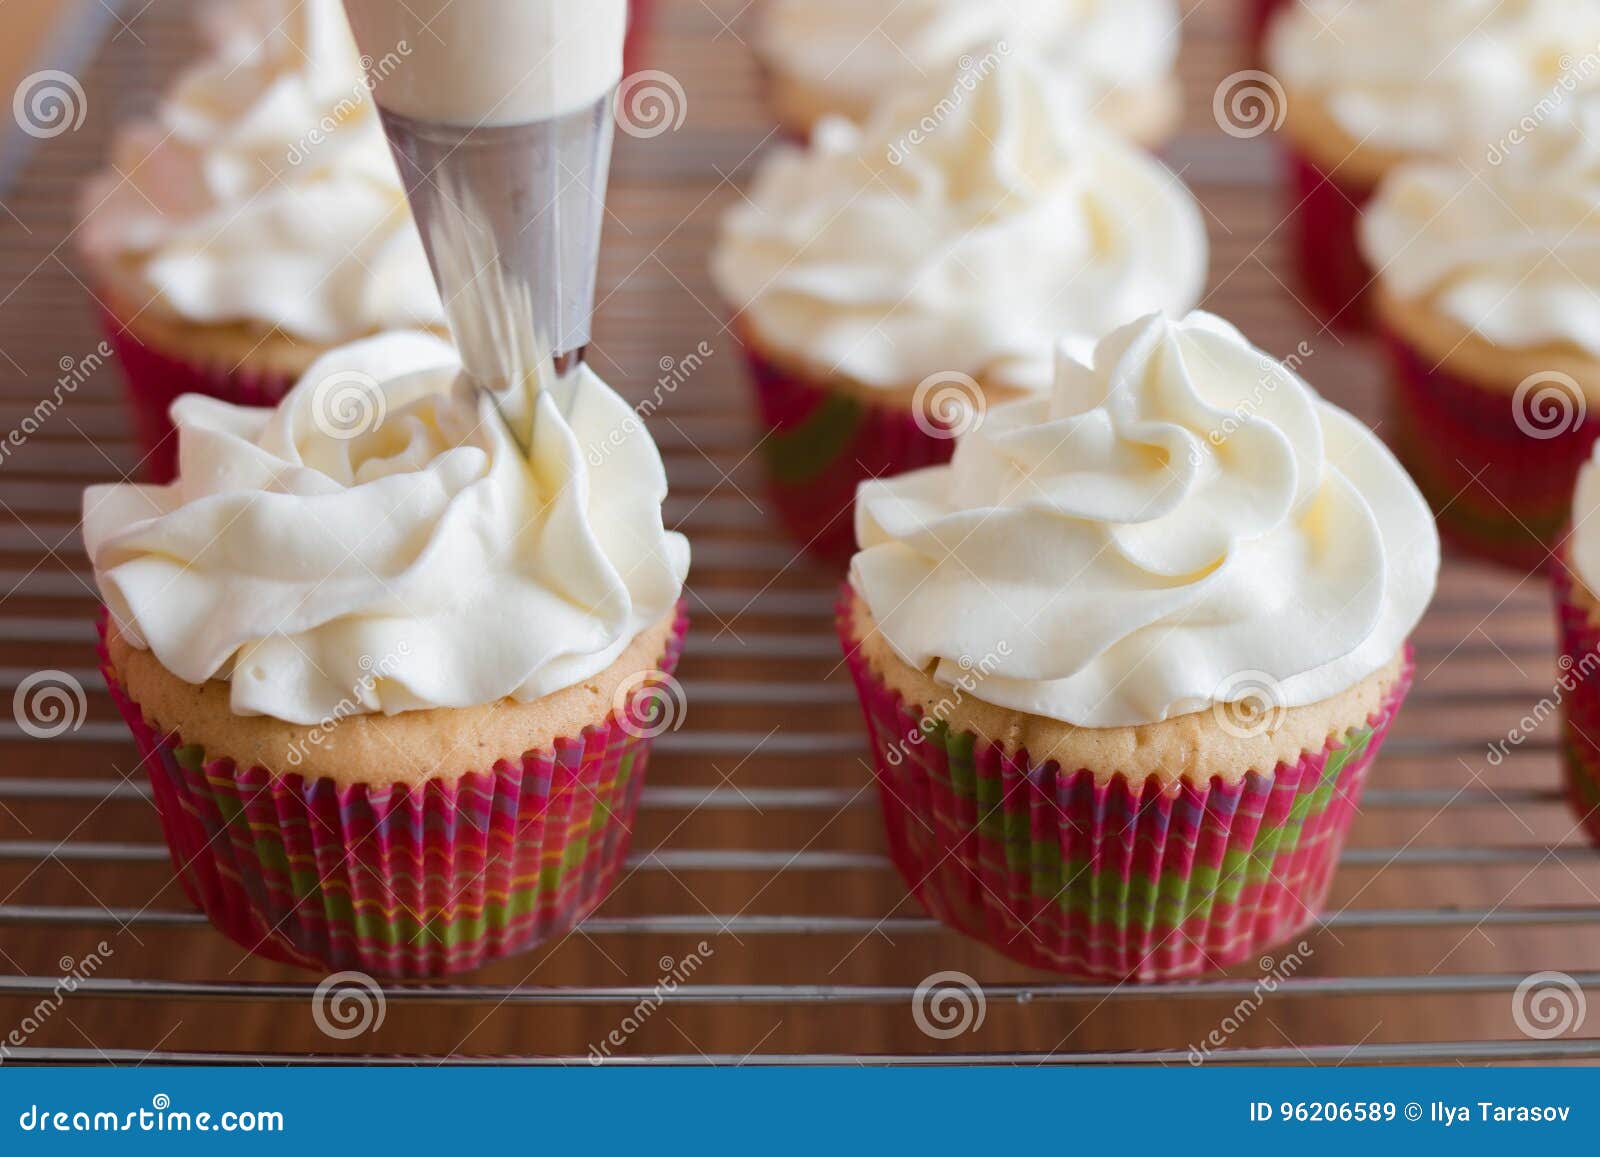 baker decorates muffins with cream and confectionery nozzles